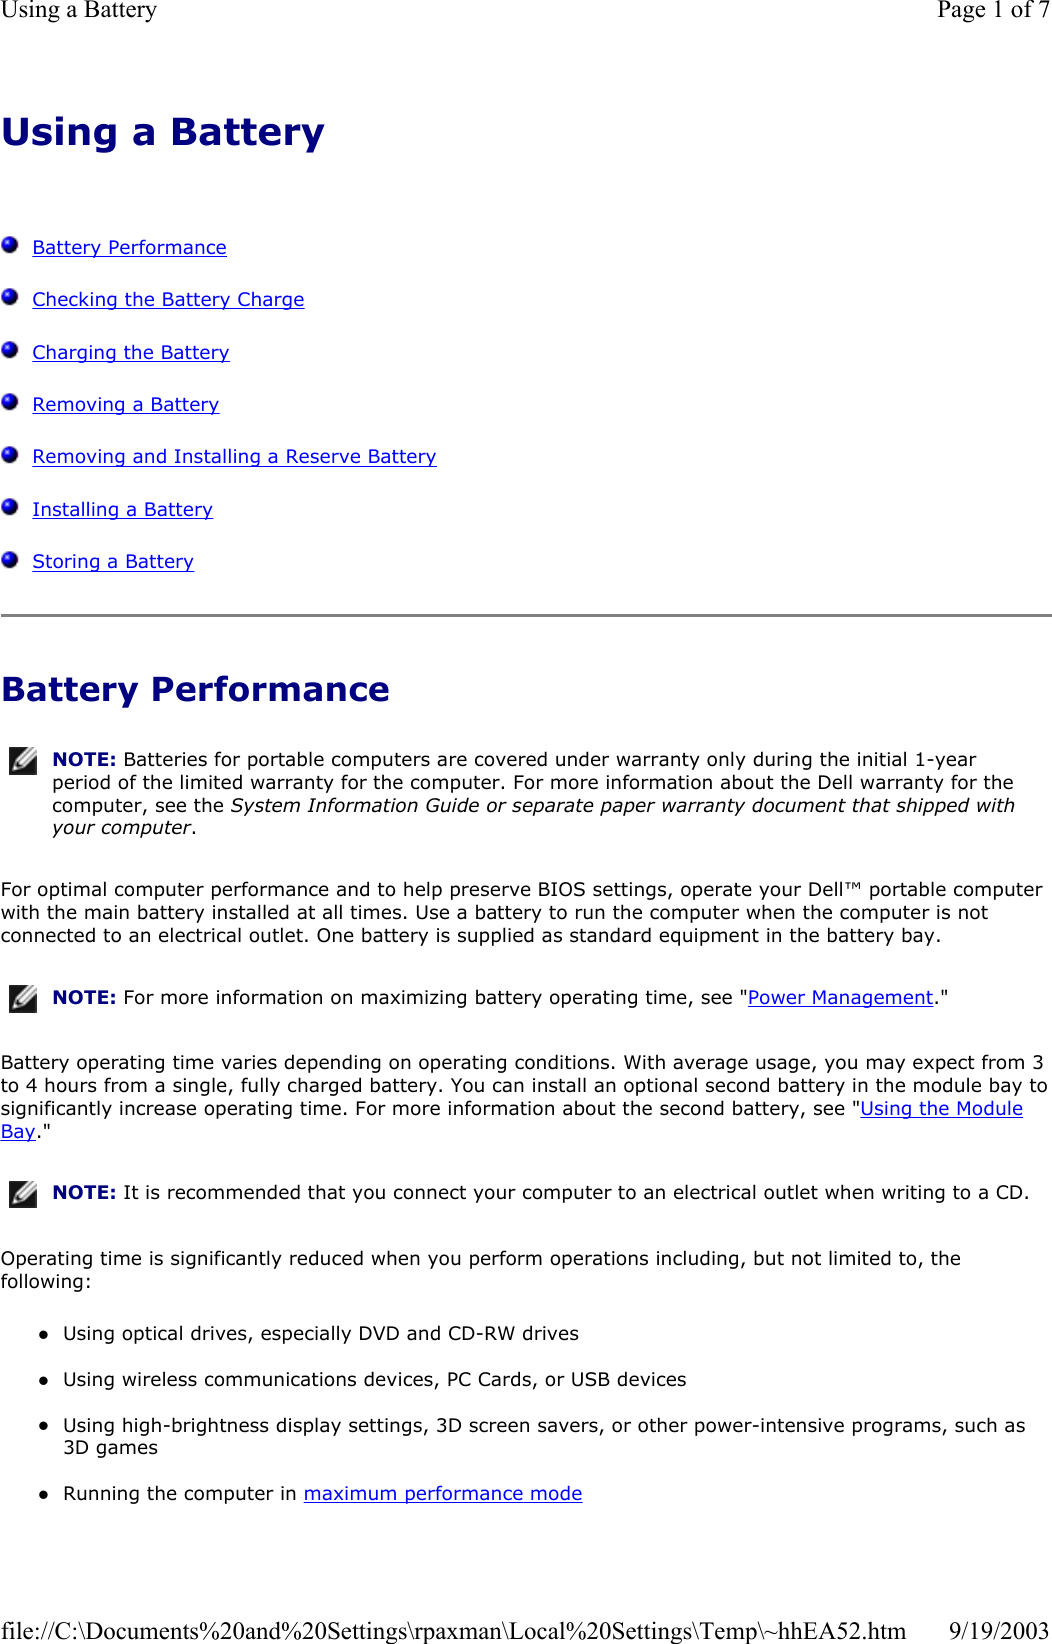 Using a Battery      Battery Performance   Checking the Battery Charge   Charging the Battery   Removing a Battery   Removing and Installing a Reserve Battery   Installing a Battery   Storing a Battery Battery Performance For optimal computer performance and to help preserve BIOS settings, operate your Dell™ portable computer with the main battery installed at all times. Use a battery to run the computer when the computer is not connected to an electrical outlet. One battery is supplied as standard equipment in the battery bay. Battery operating time varies depending on operating conditions. With average usage, you may expect from 3 to 4 hours from a single, fully charged battery. You can install an optional second battery in the module bay tosignificantly increase operating time. For more information about the second battery, see &quot;Using the Module Bay.&quot; Operating time is significantly reduced when you perform operations including, but not limited to, the following: zUsing optical drives, especially DVD and CD-RW drives  zUsing wireless communications devices, PC Cards, or USB devices  zUsing high-brightness display settings, 3D screen savers, or other power-intensive programs, such as 3D games  zRunning the computer in maximum performance mode  NOTE: Batteries for portable computers are covered under warranty only during the initial 1-year period of the limited warranty for the computer. For more information about the Dell warranty for the computer, see the System Information Guide or separate paper warranty document that shipped with your computer.NOTE: For more information on maximizing battery operating time, see &quot;Power Management.&quot;NOTE: It is recommended that you connect your computer to an electrical outlet when writing to a CD.Page 1 of 7Using a Battery9/19/2003file://C:\Documents%20and%20Settings\rpaxman\Local%20Settings\Temp\~hhEA52.htm